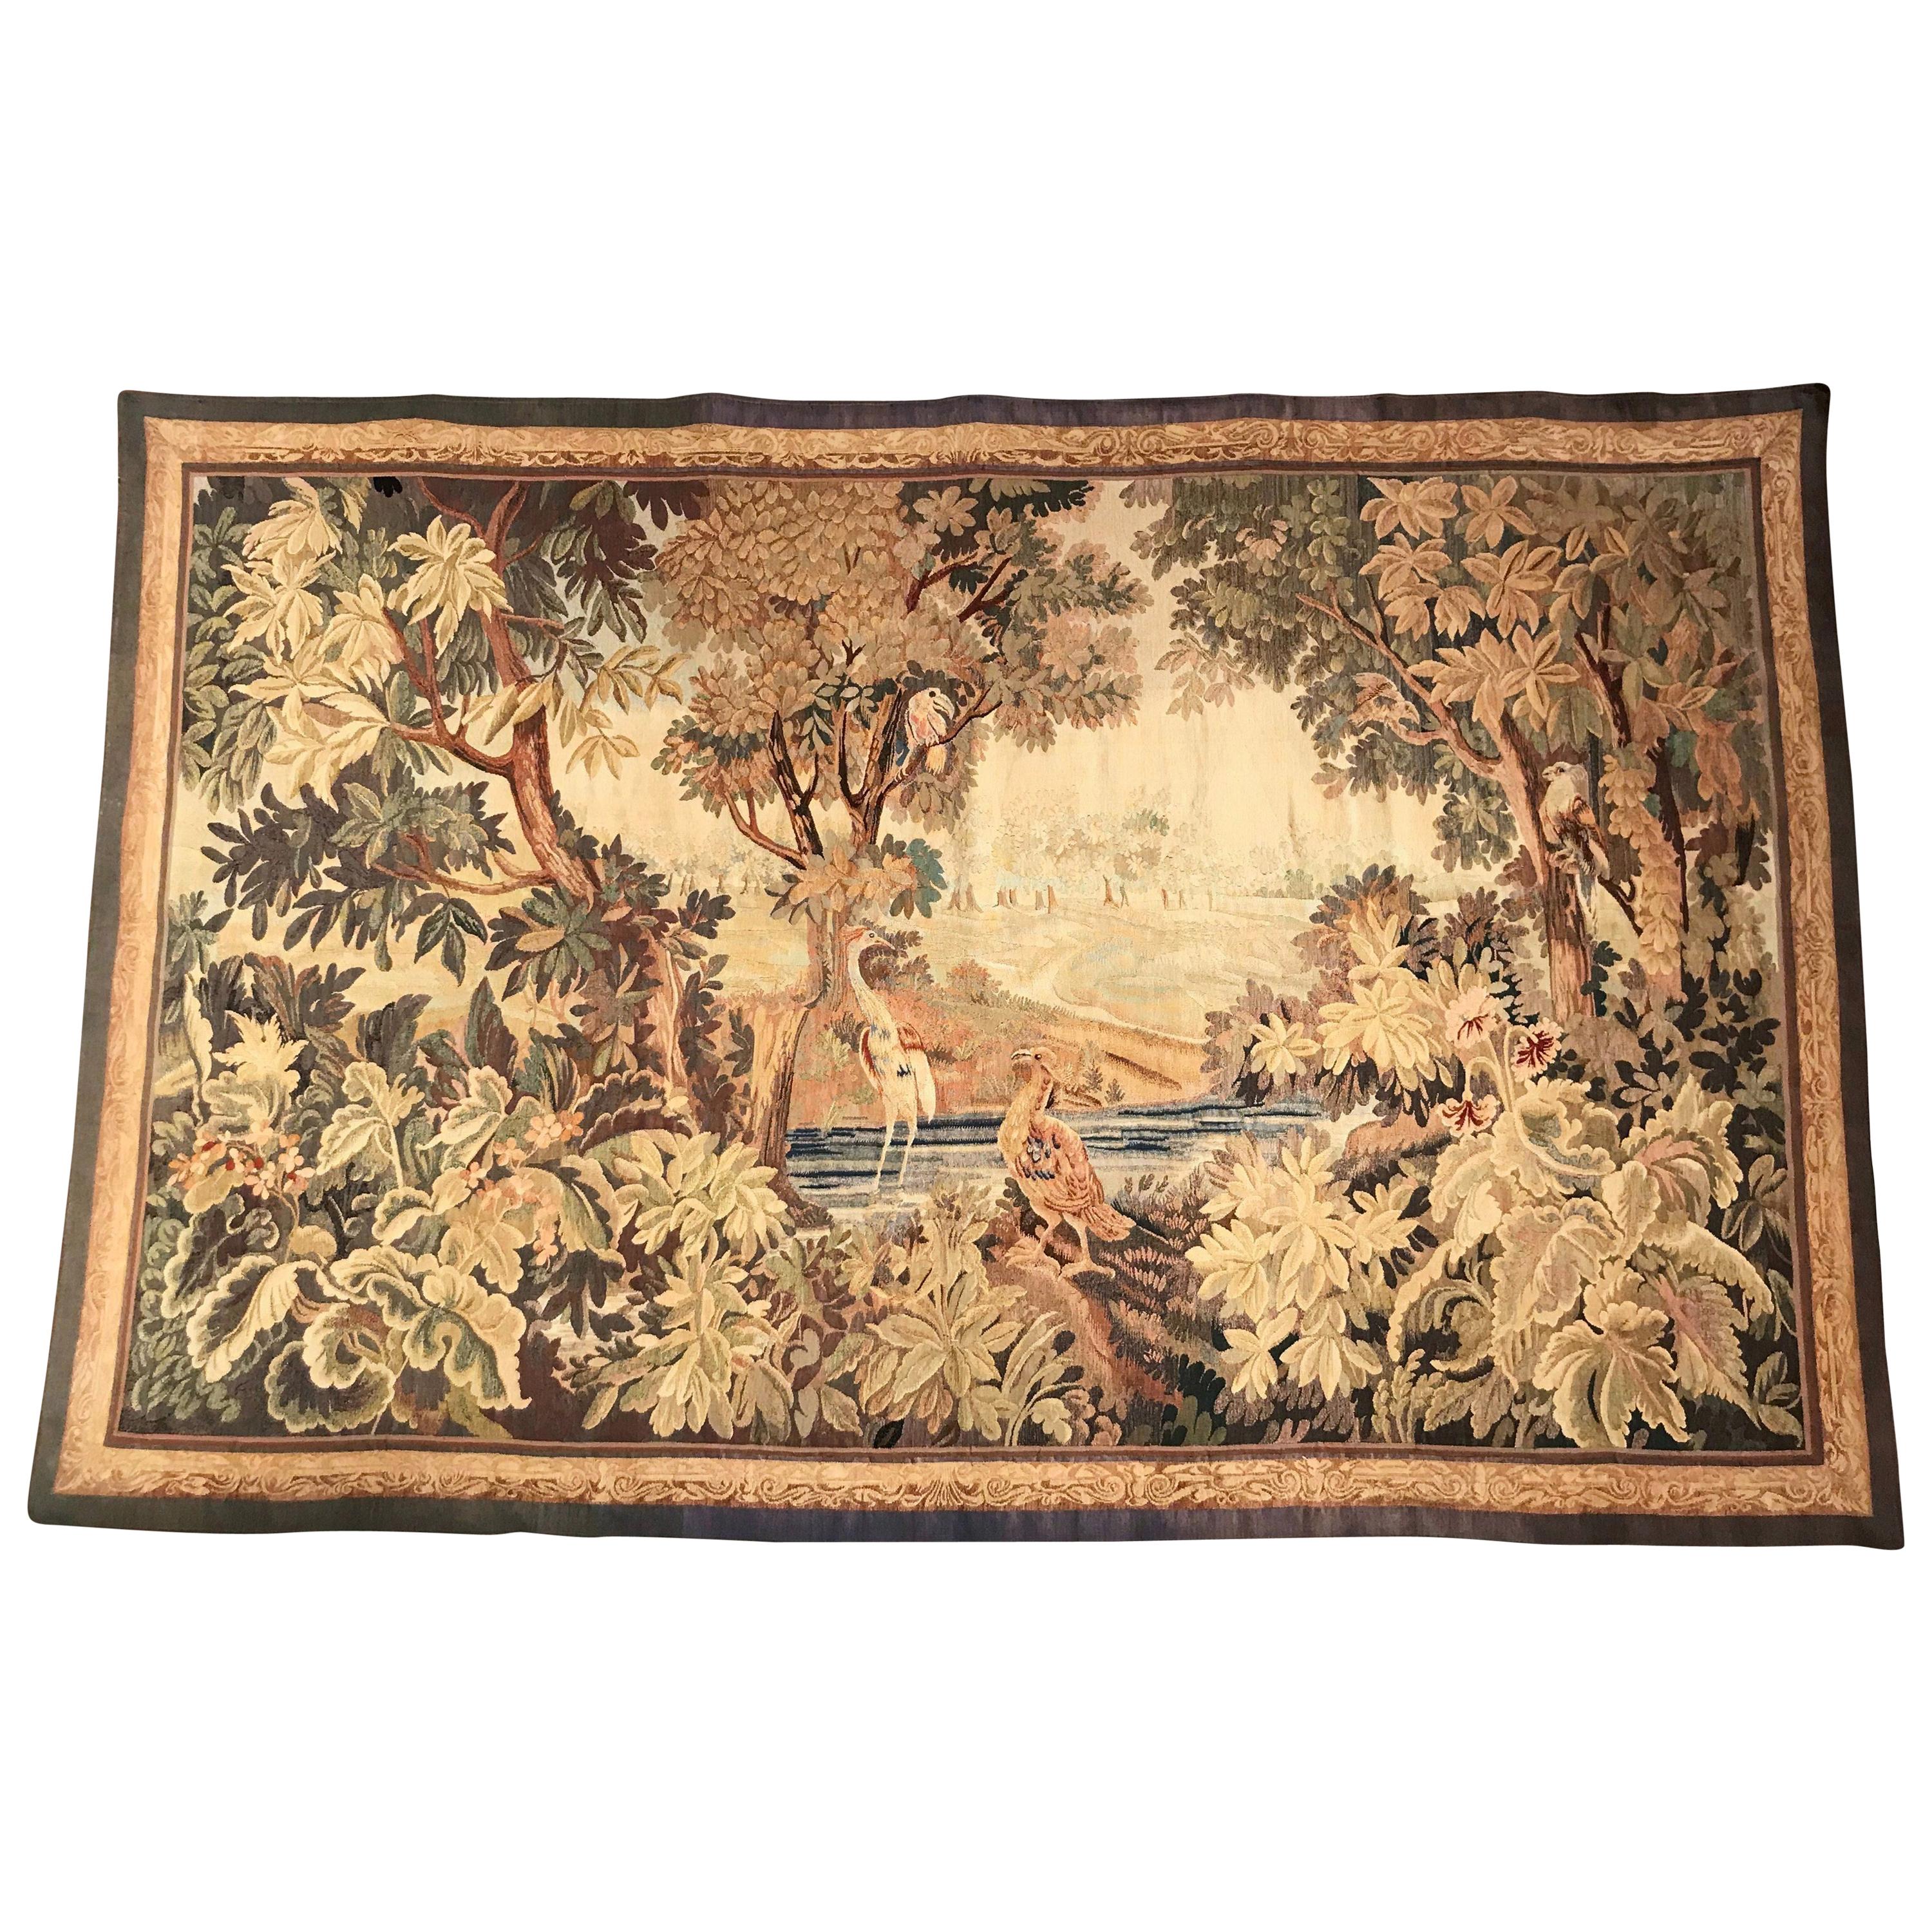 Late 19th Century French Verdure Aubusson Tapestry with Birds, Trees and Stream